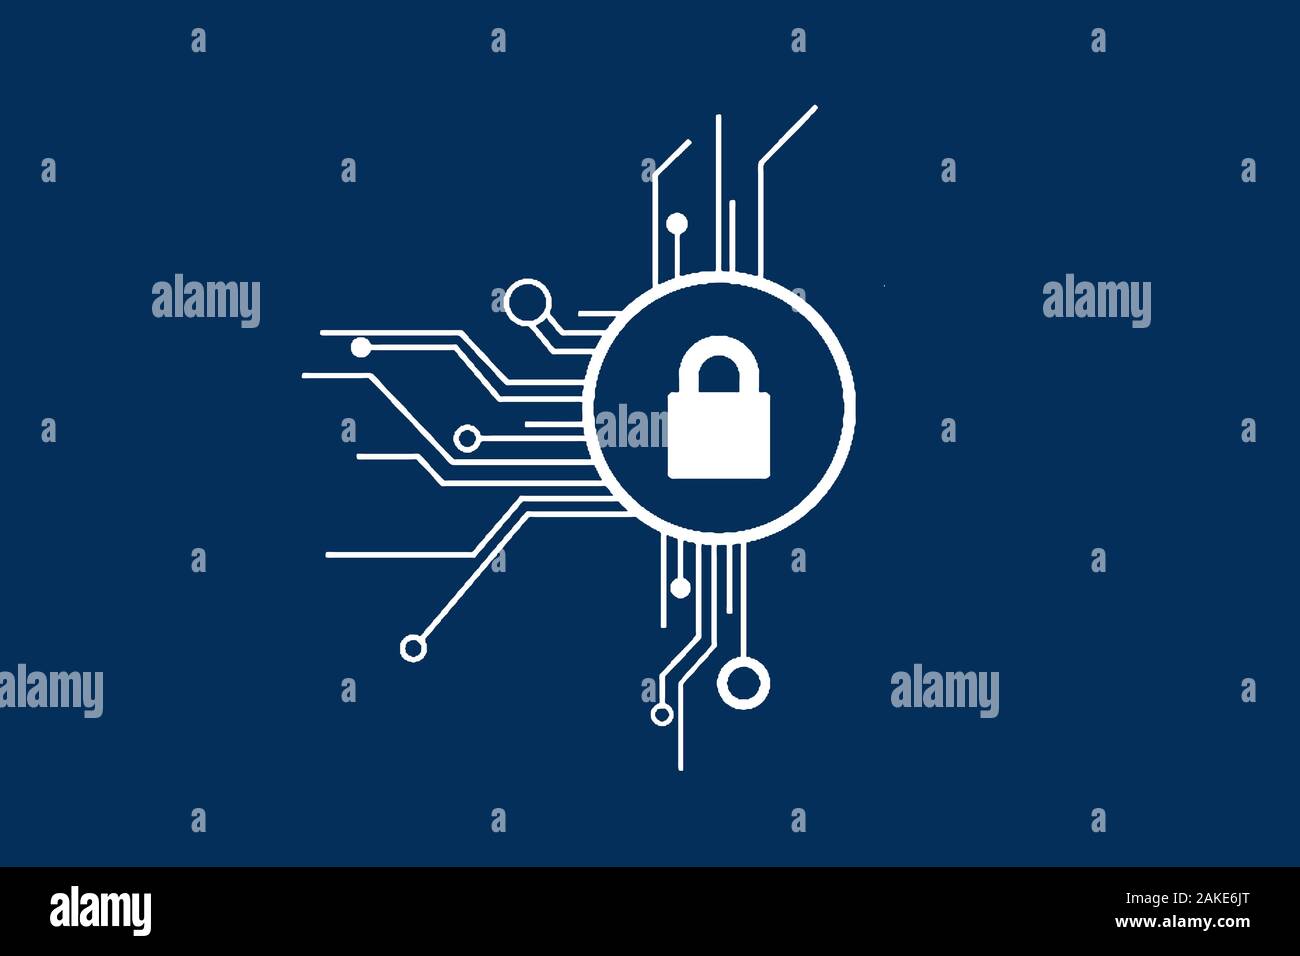 Abstract security illustration icon. Shield security icon. Lock security icon. Stock Photo